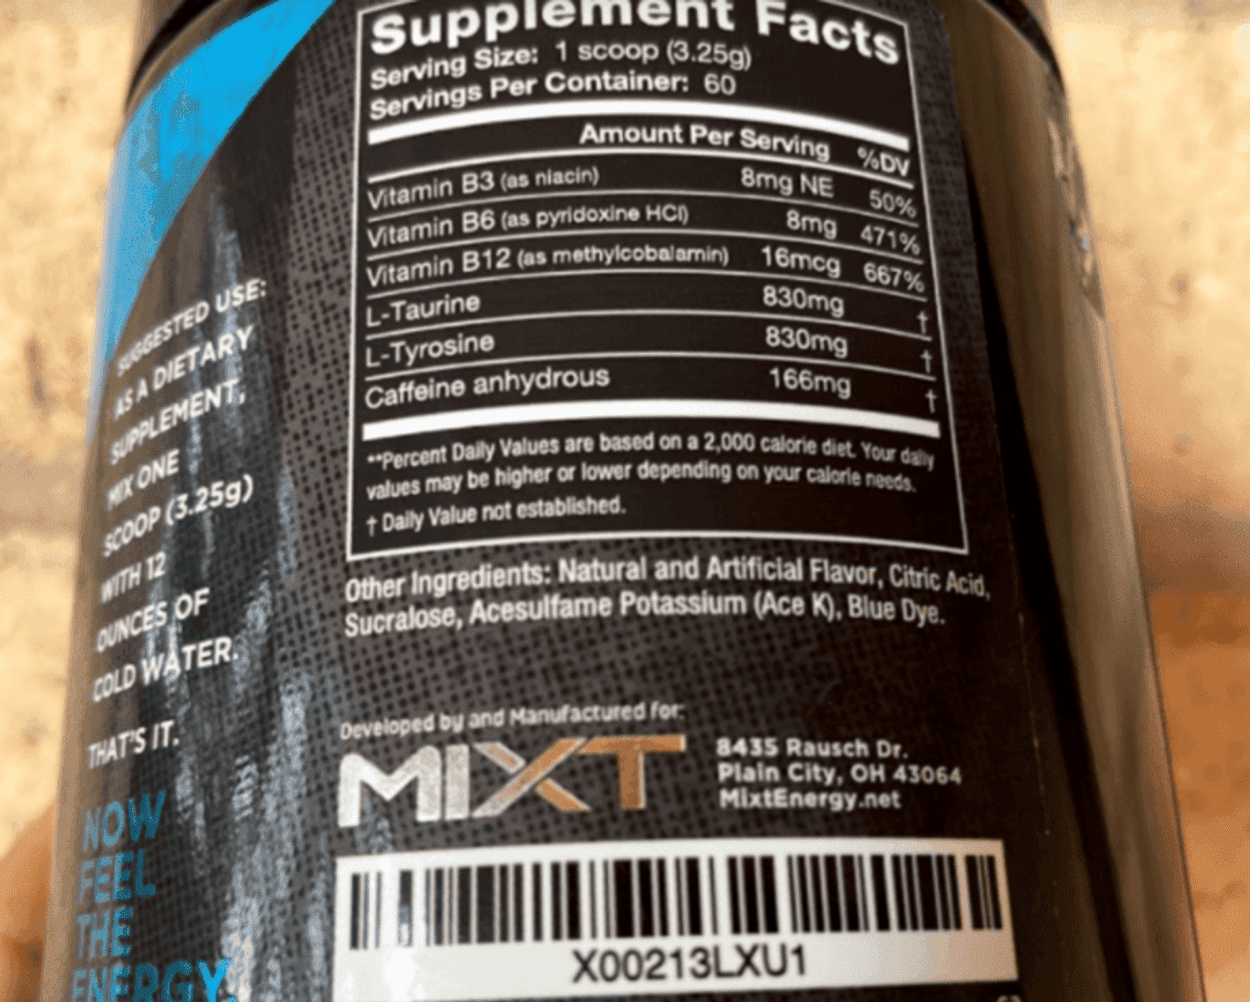 The supplement facts of Mixt Energy.